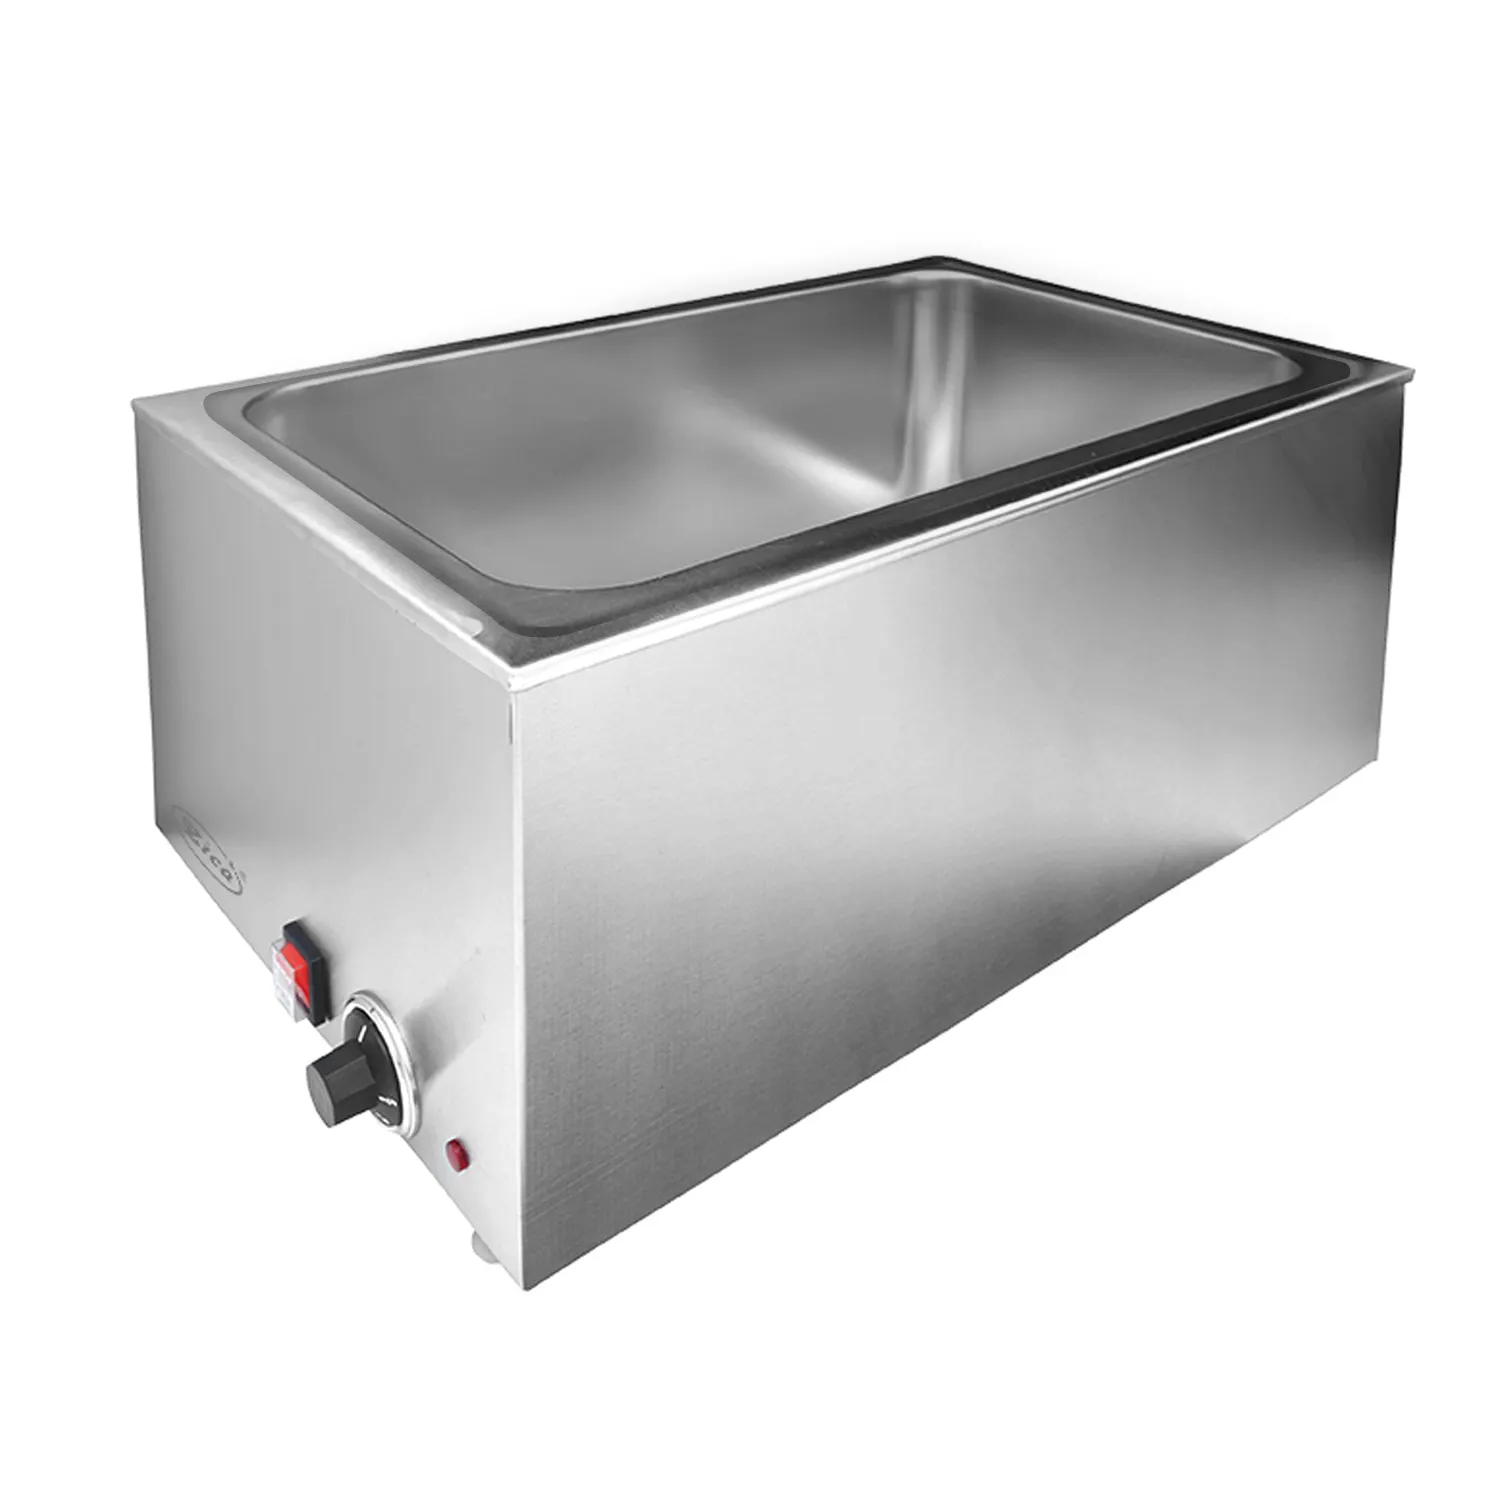 ZCK165A Commercial Stainless Steel Electrical Bain Marie Buffet Food Warmer Steam Table for Catering and Restaurants